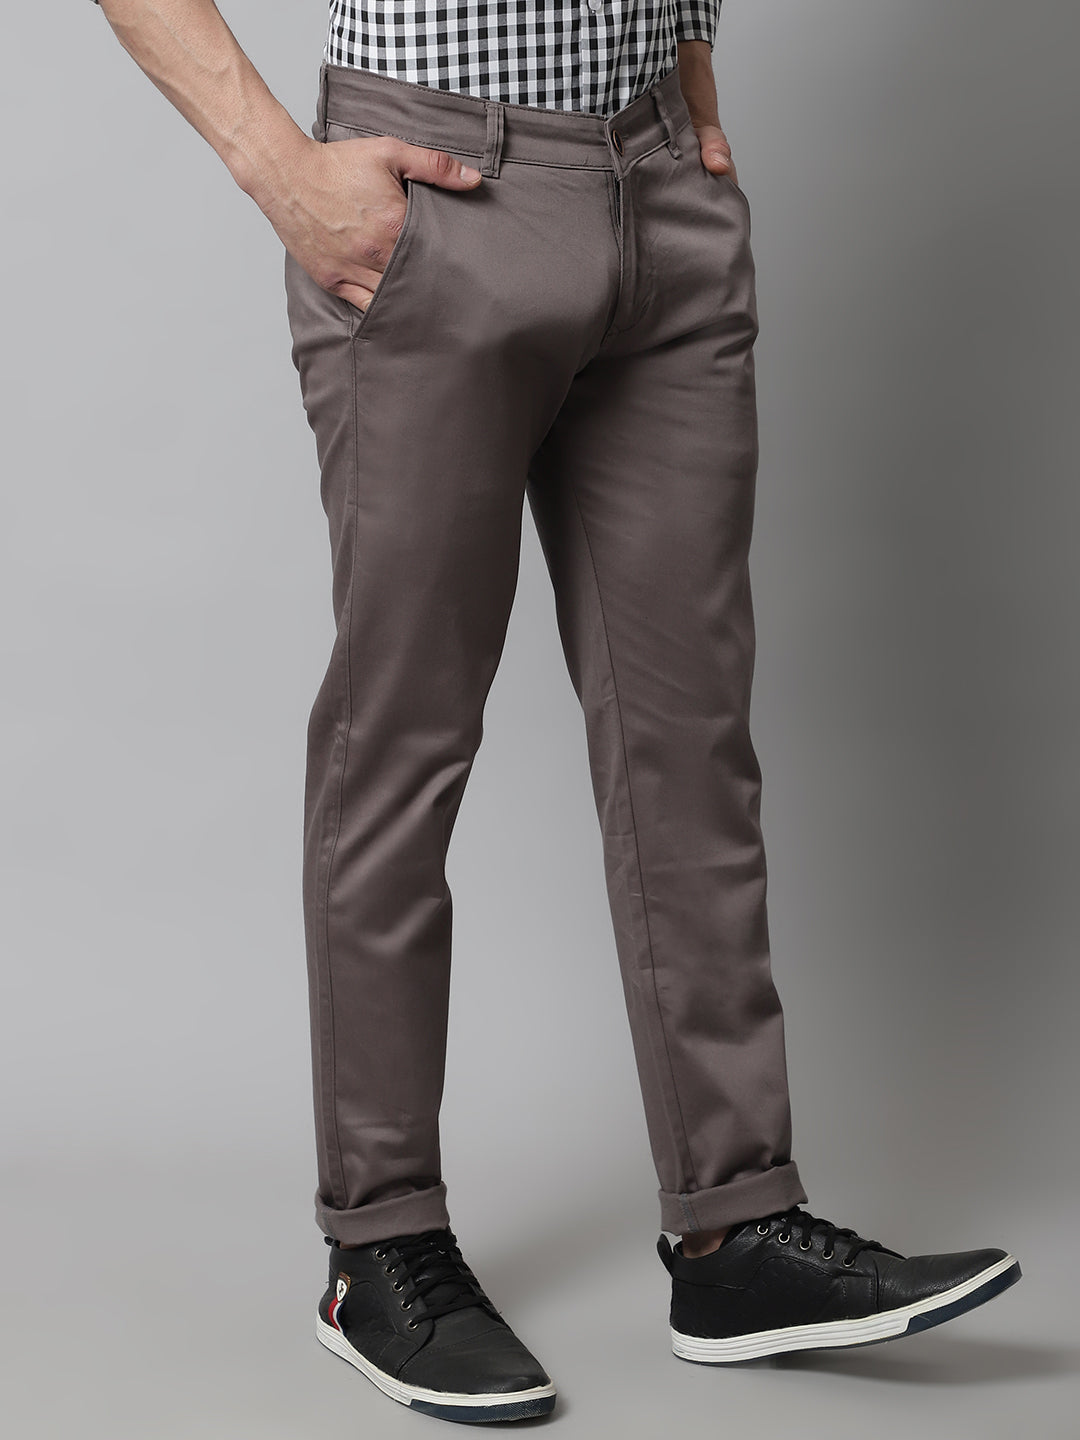 Majestic Man Regular Fit Satin Finish Cotton Casual Solid Chinos Trouser - Graphite